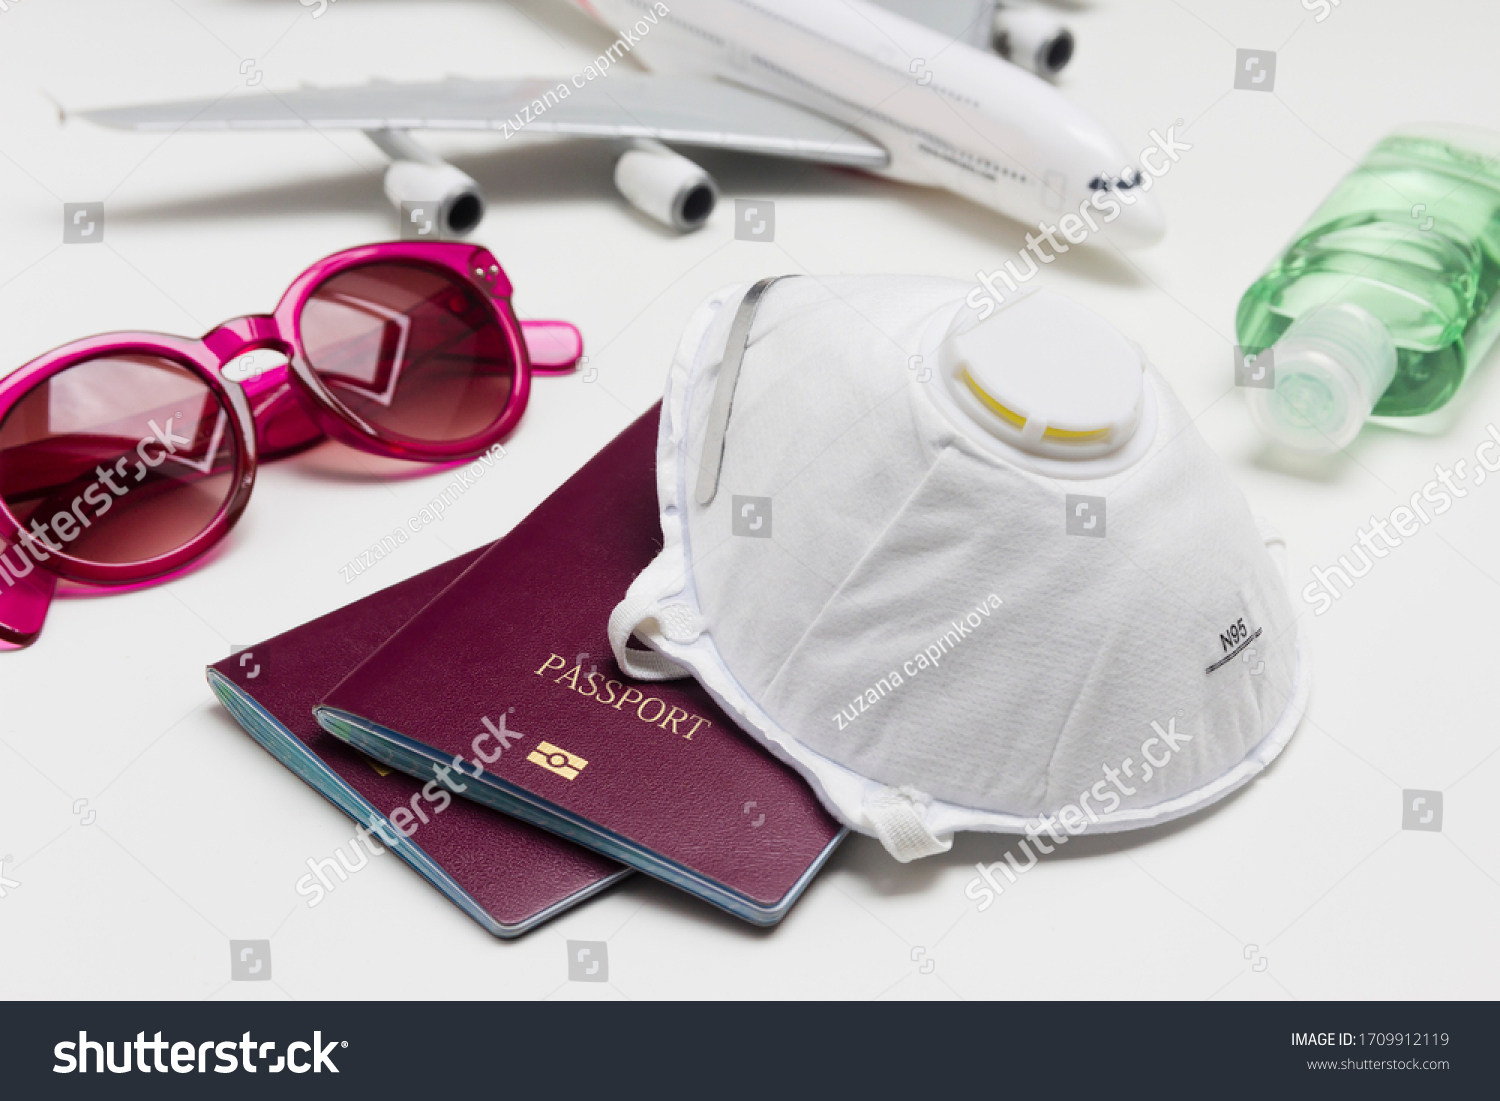 Travelling during the coronavirus outbreak. Passport with face mask, sunglasses and hand sanitizer gel. Travel and Holiday concept corona virus epidemic.  #1709912119